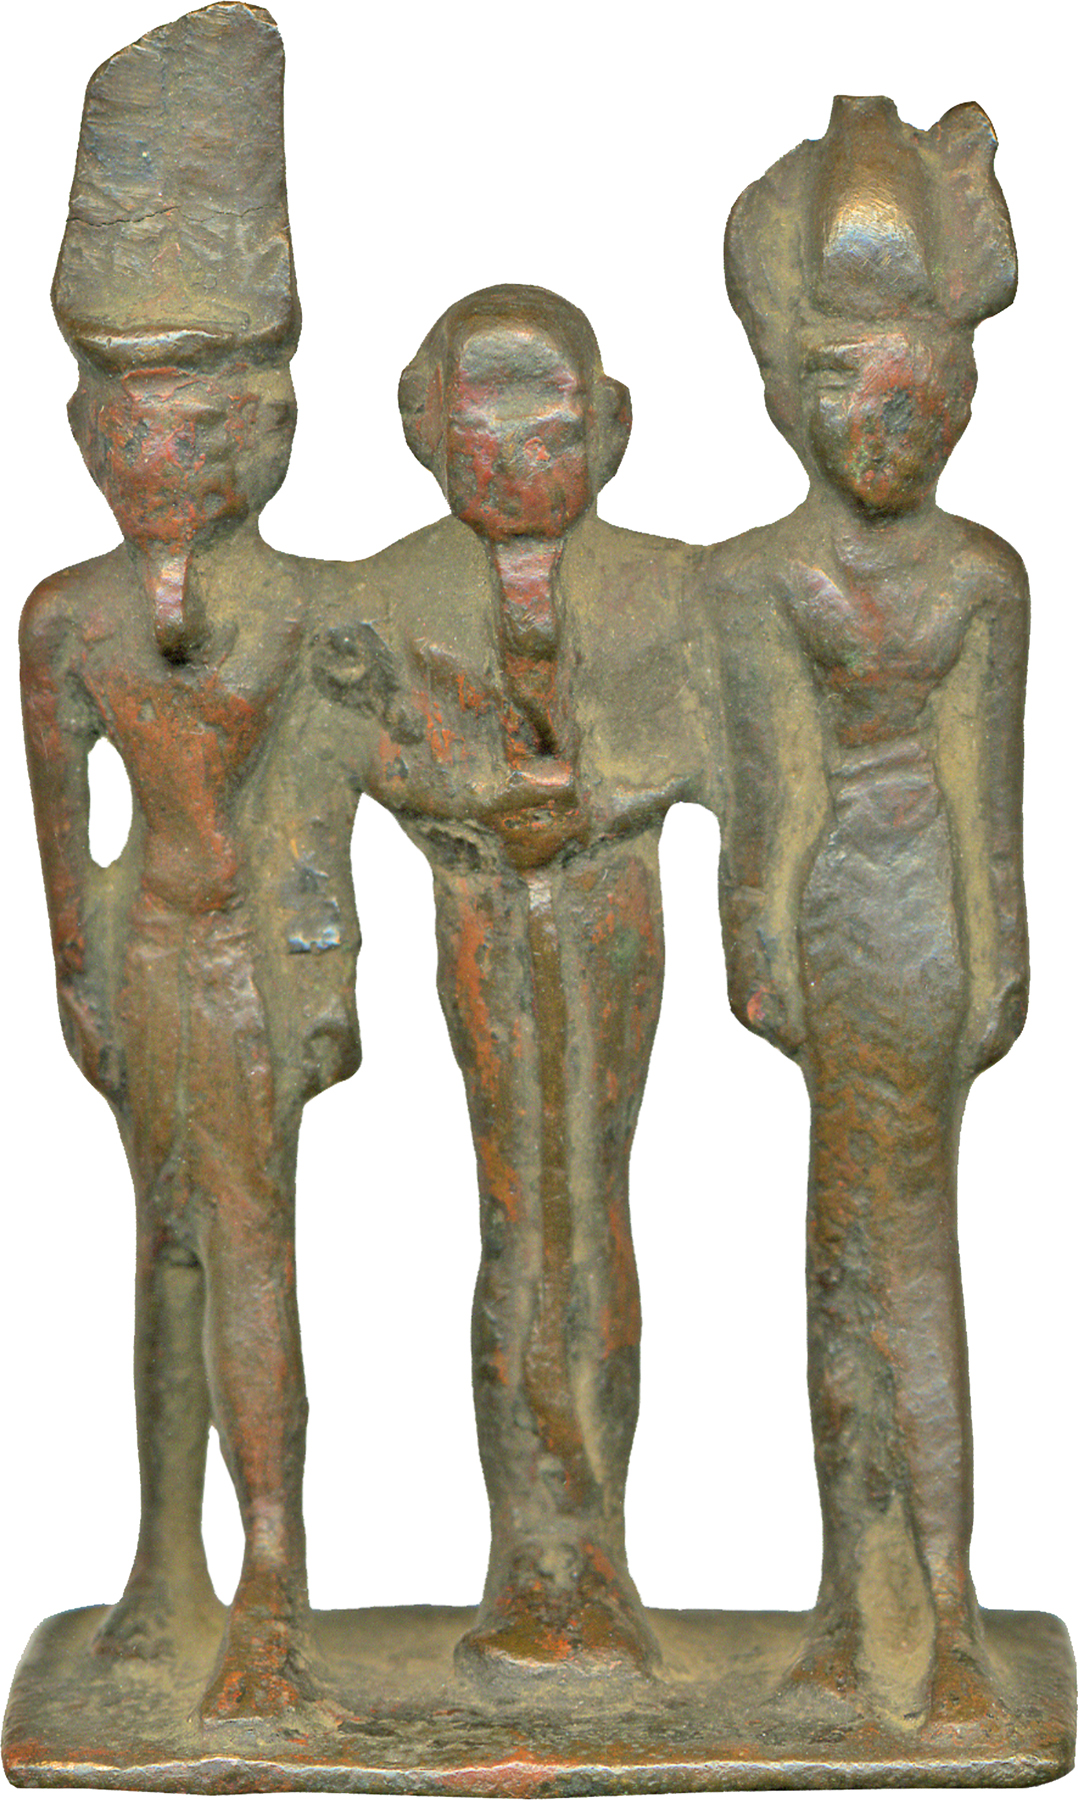 Image for Divine Triad of Amun, Ptah and a Goddess Figure, Probably Hathor